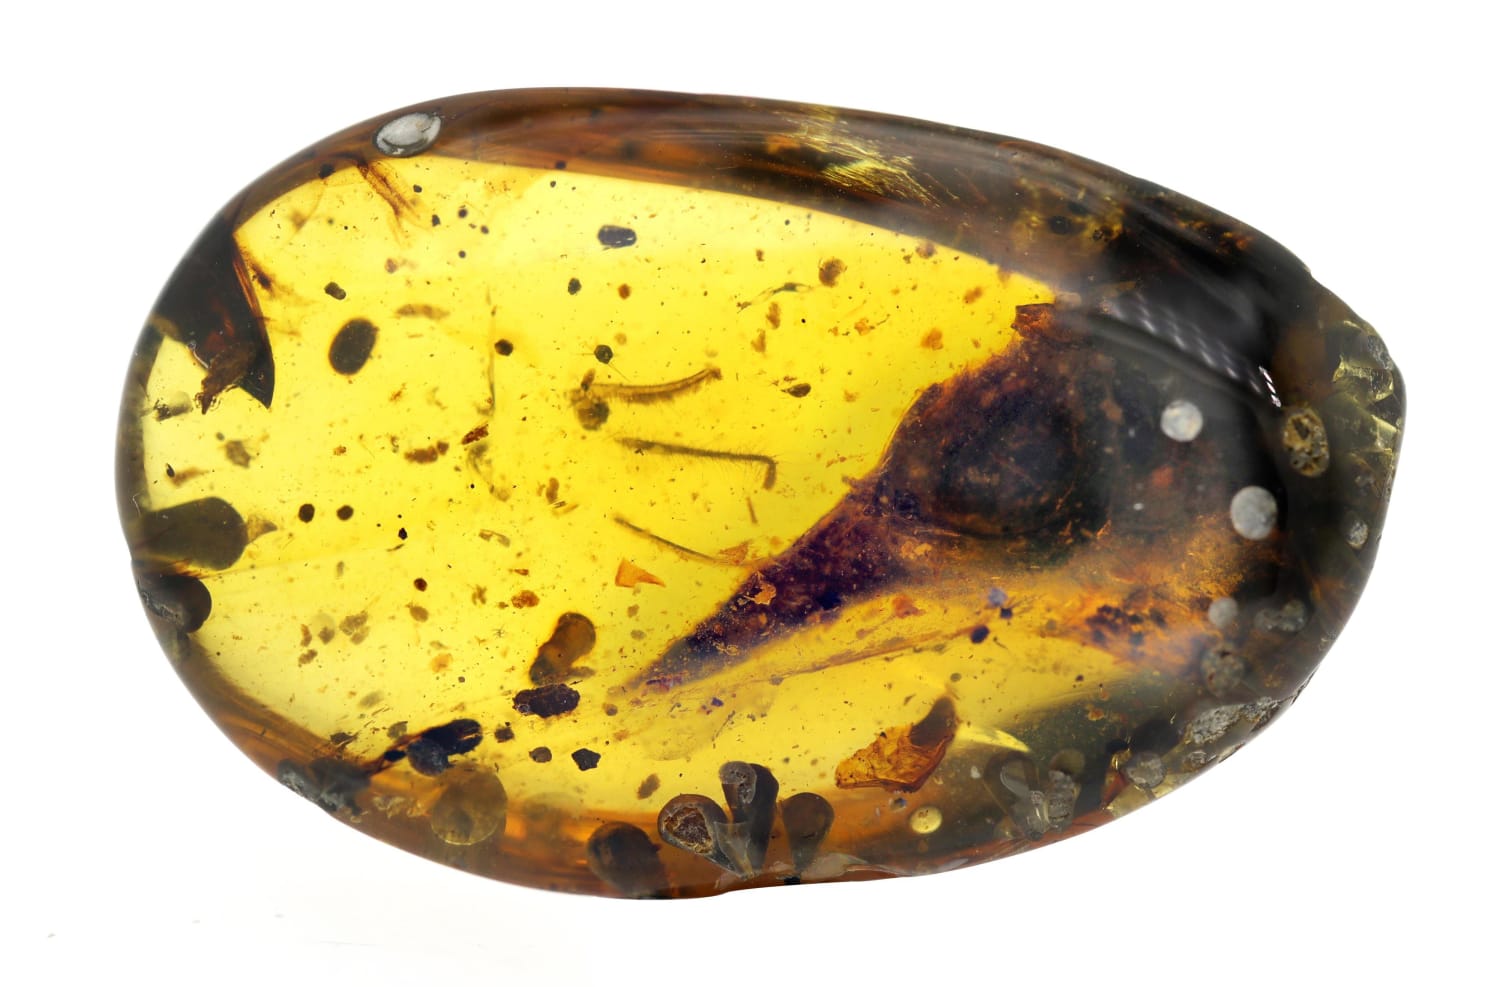 We’re posting preserved bird heads? This is a 99-million-year-old bird-like dinosaur preserved in amber